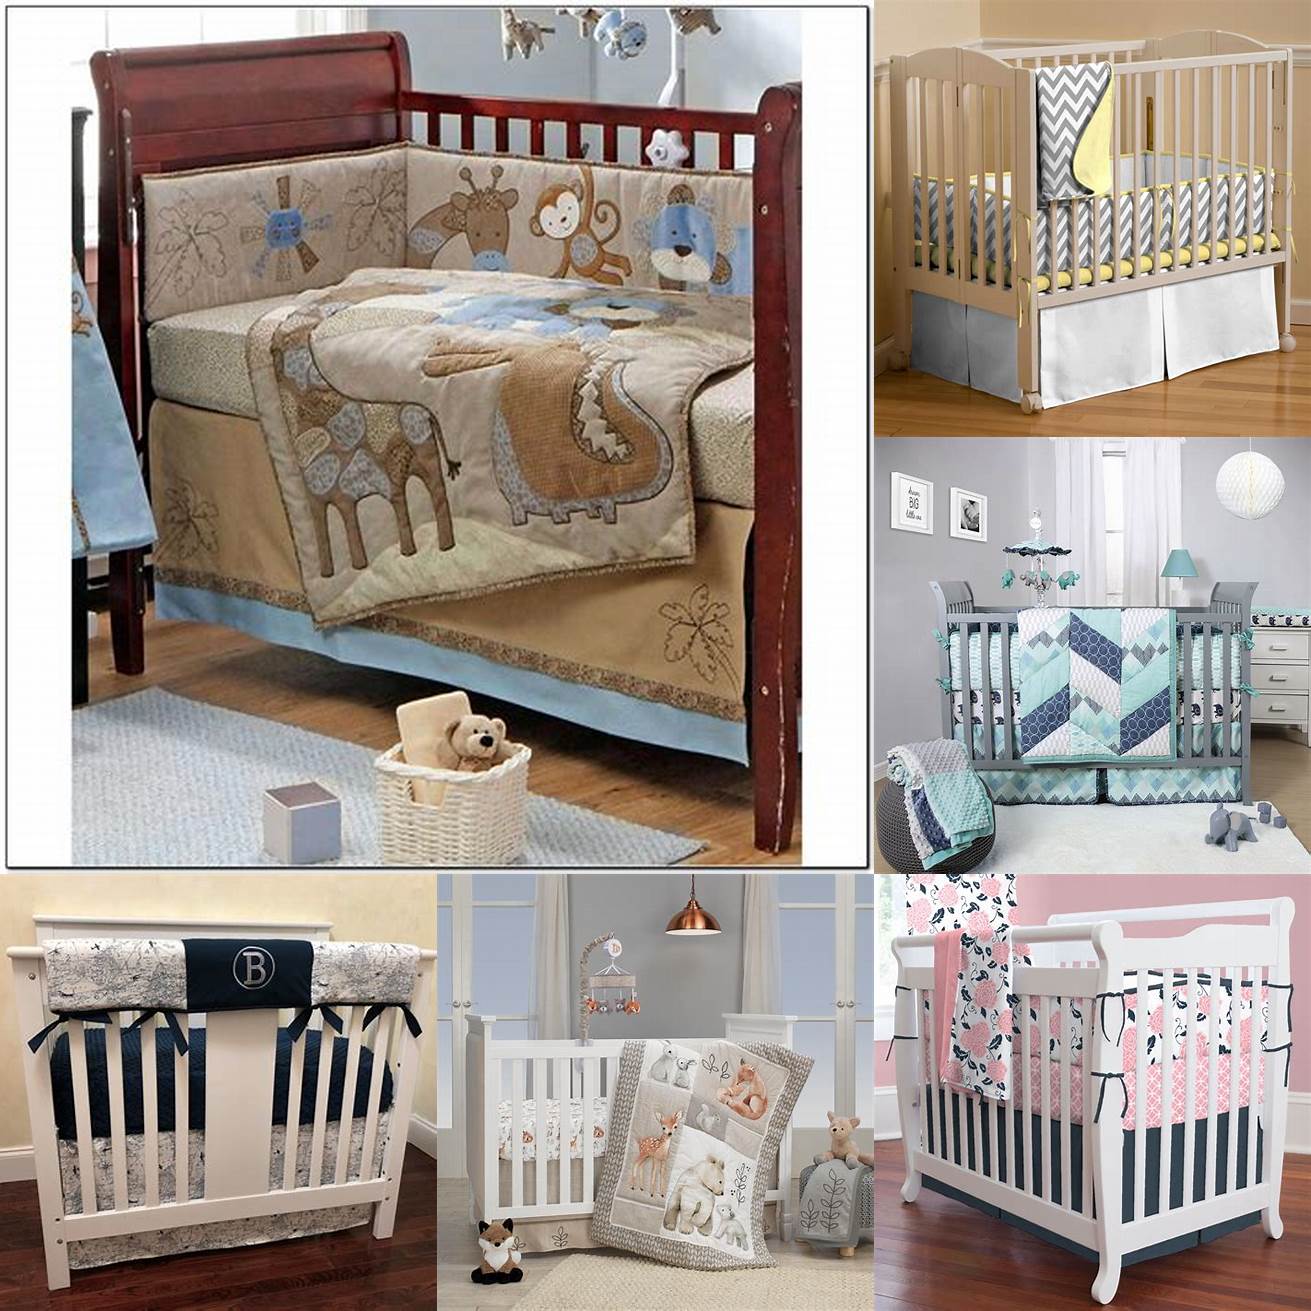 Mini Crib Bedding Sets Mini crib bedding sets are designed for use with mini cribs which are smaller than standard cribs They usually include a fitted sheet a skirt and a small blanket or quilt